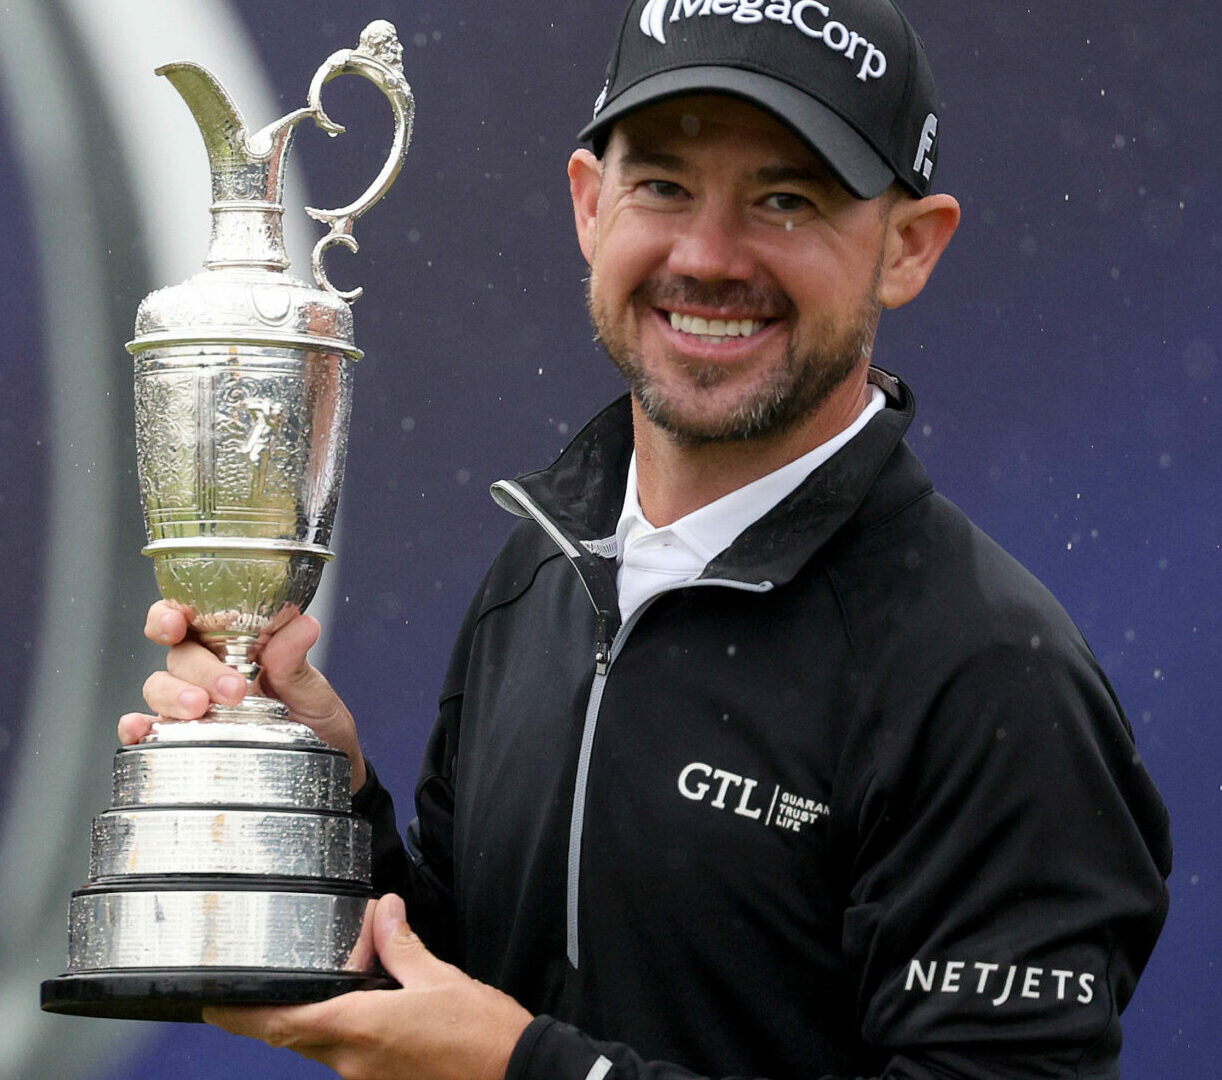 HOYLAKE, ENGLAND - JULY 23: Brian Harman of the United States poses for a photograph with the Claret Jug on the 18th green after winning The 151st Open on Day Four of The 151st Open at Royal Liverpool Golf Club on July 23, 2023 in Hoylake, England. (Photo by Warren Little/Getty Images)